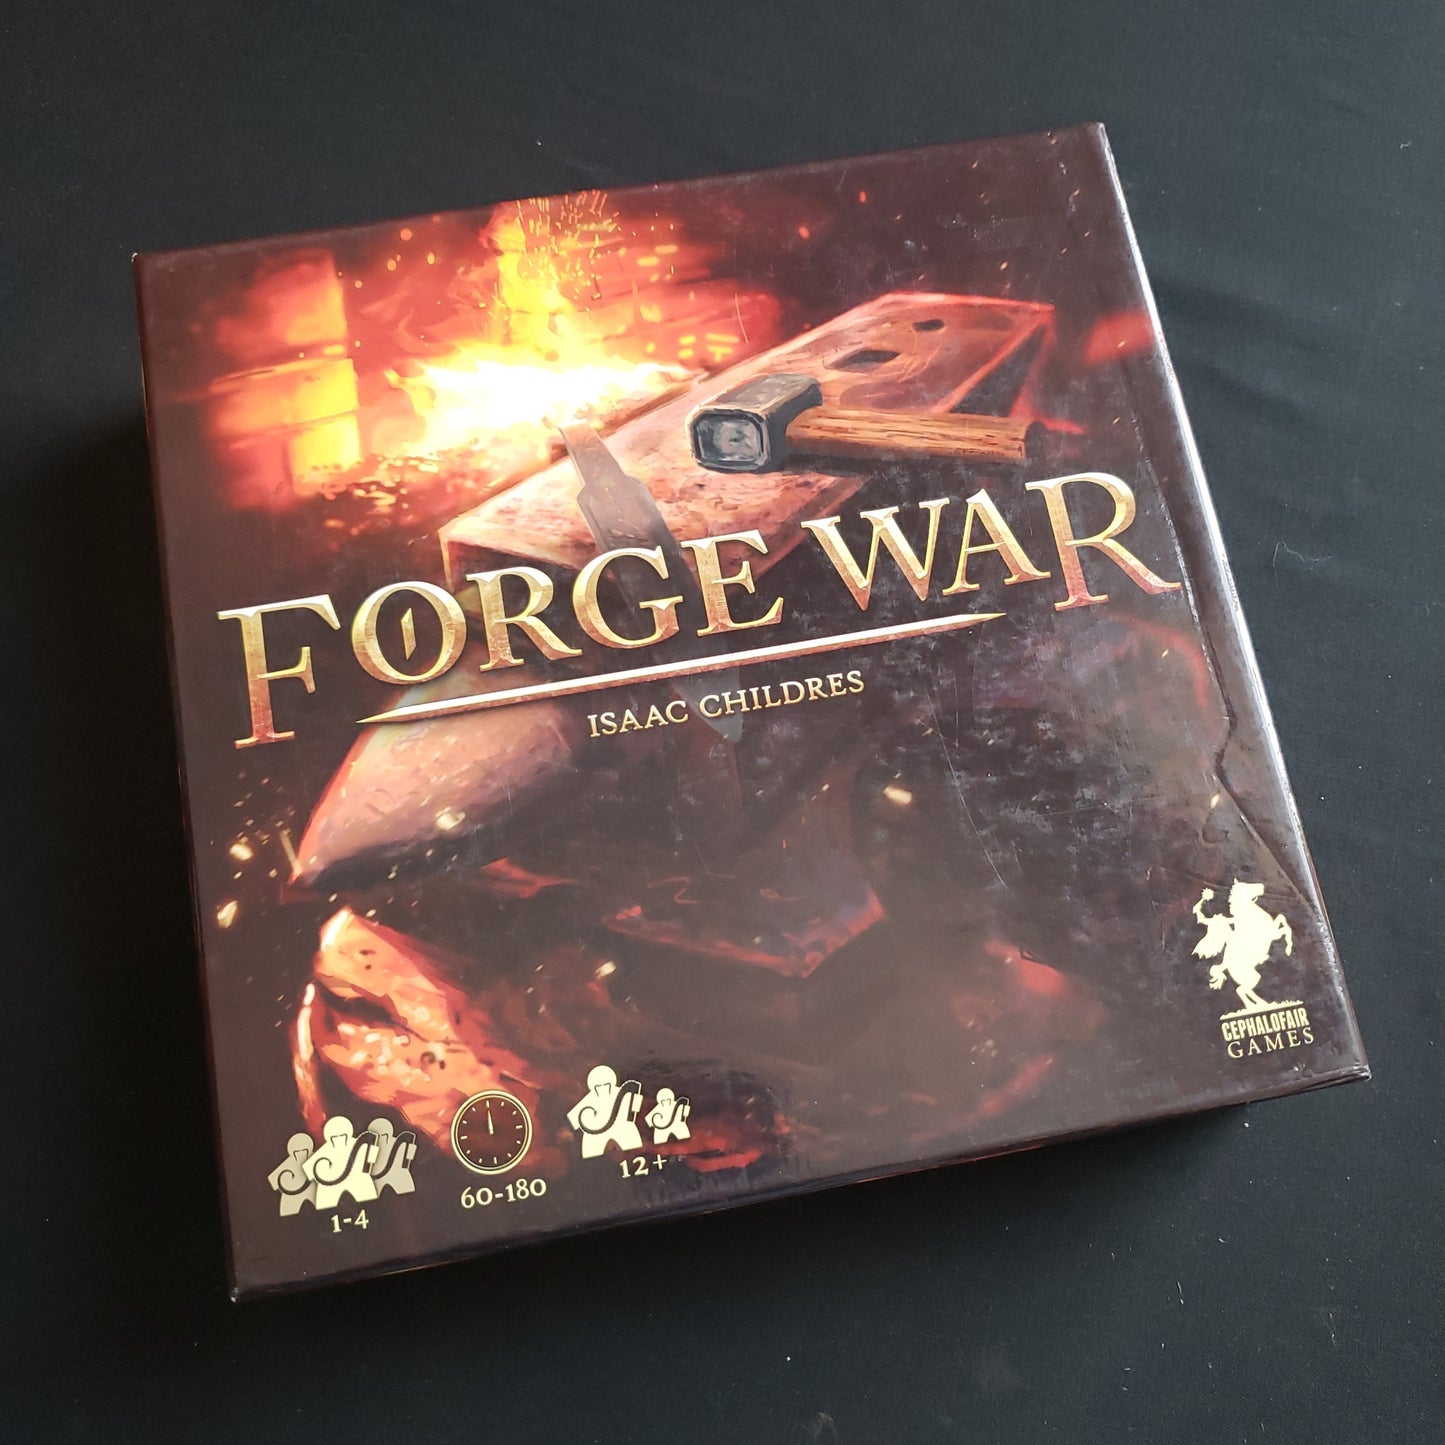 Image shows the front cover of the box of the Forge War board game